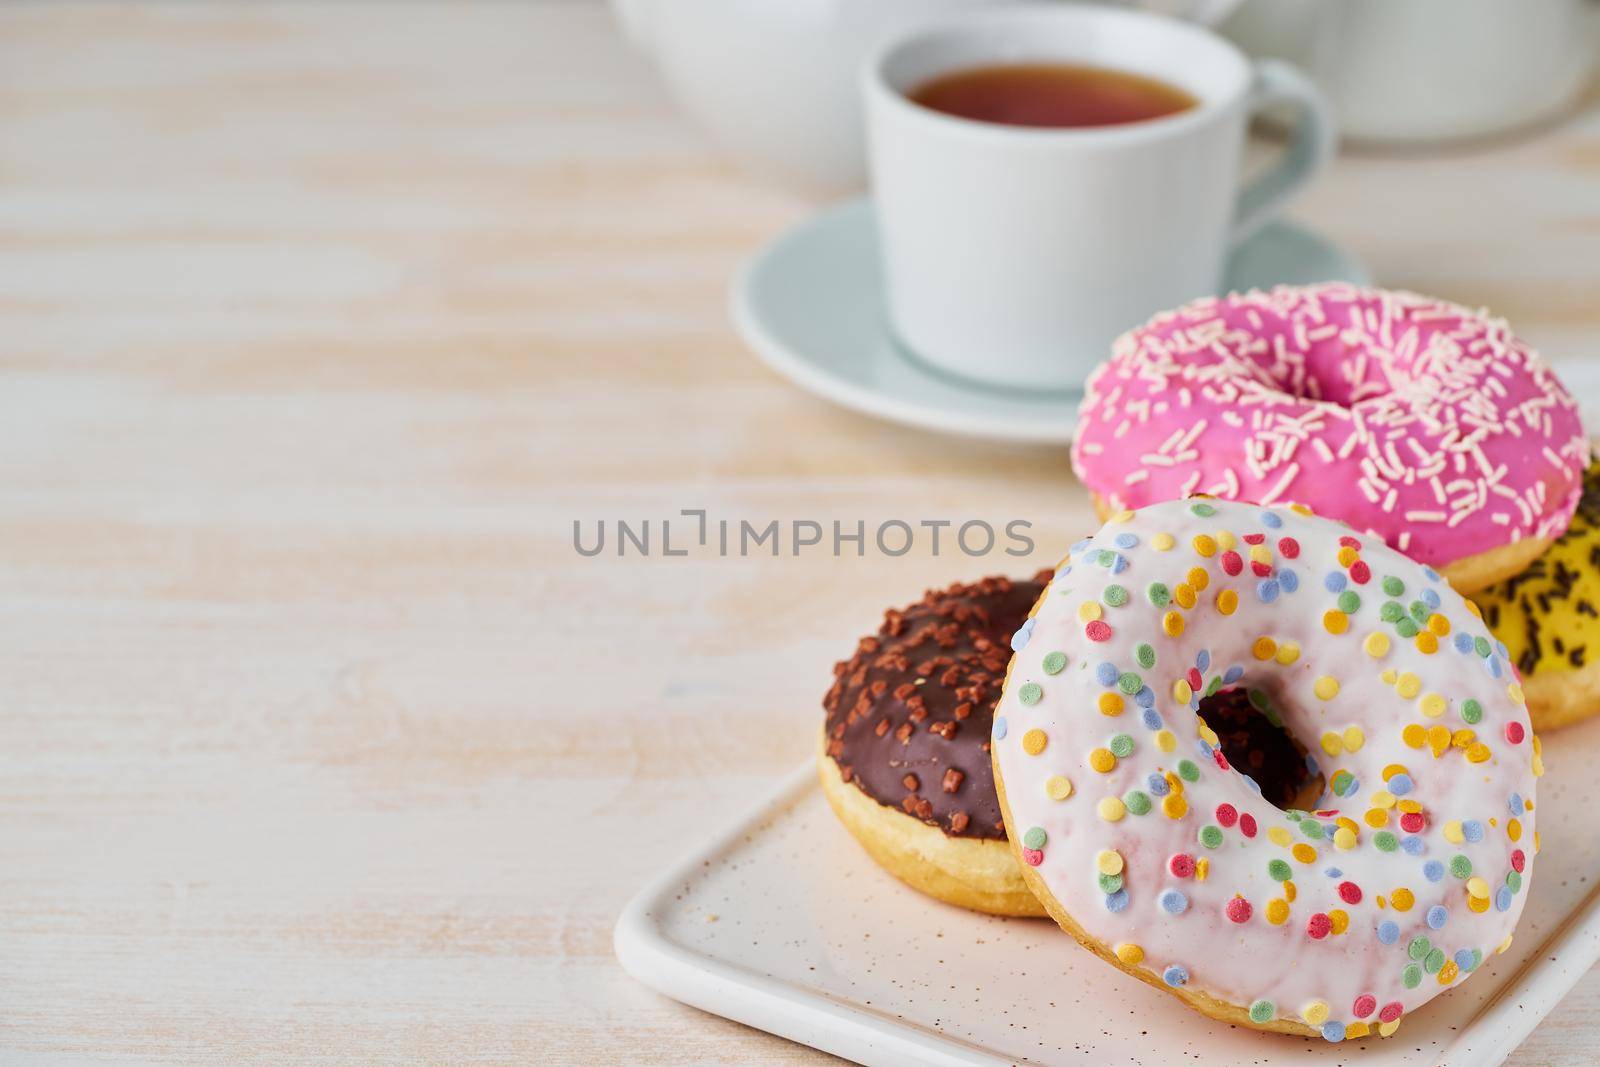 Doughnuts and tea. Bright, colorful junk food. Light beige wooden background. Side view, close up.